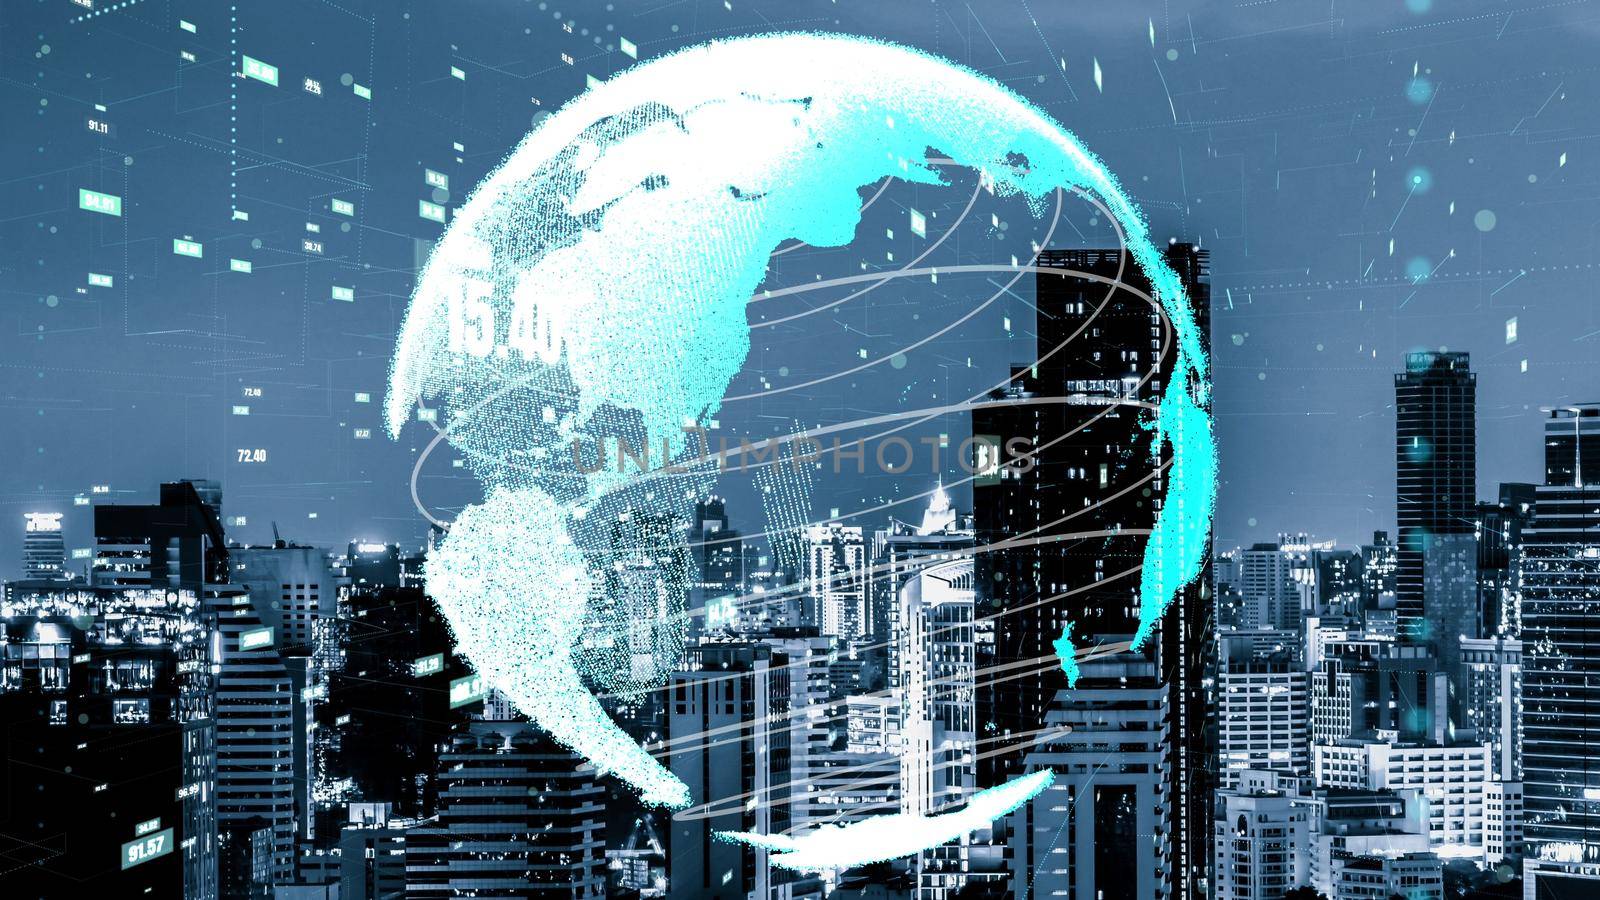 Global connection and the internet network alteration in smart city . Concept of future wireless digital connecting and social media networking .